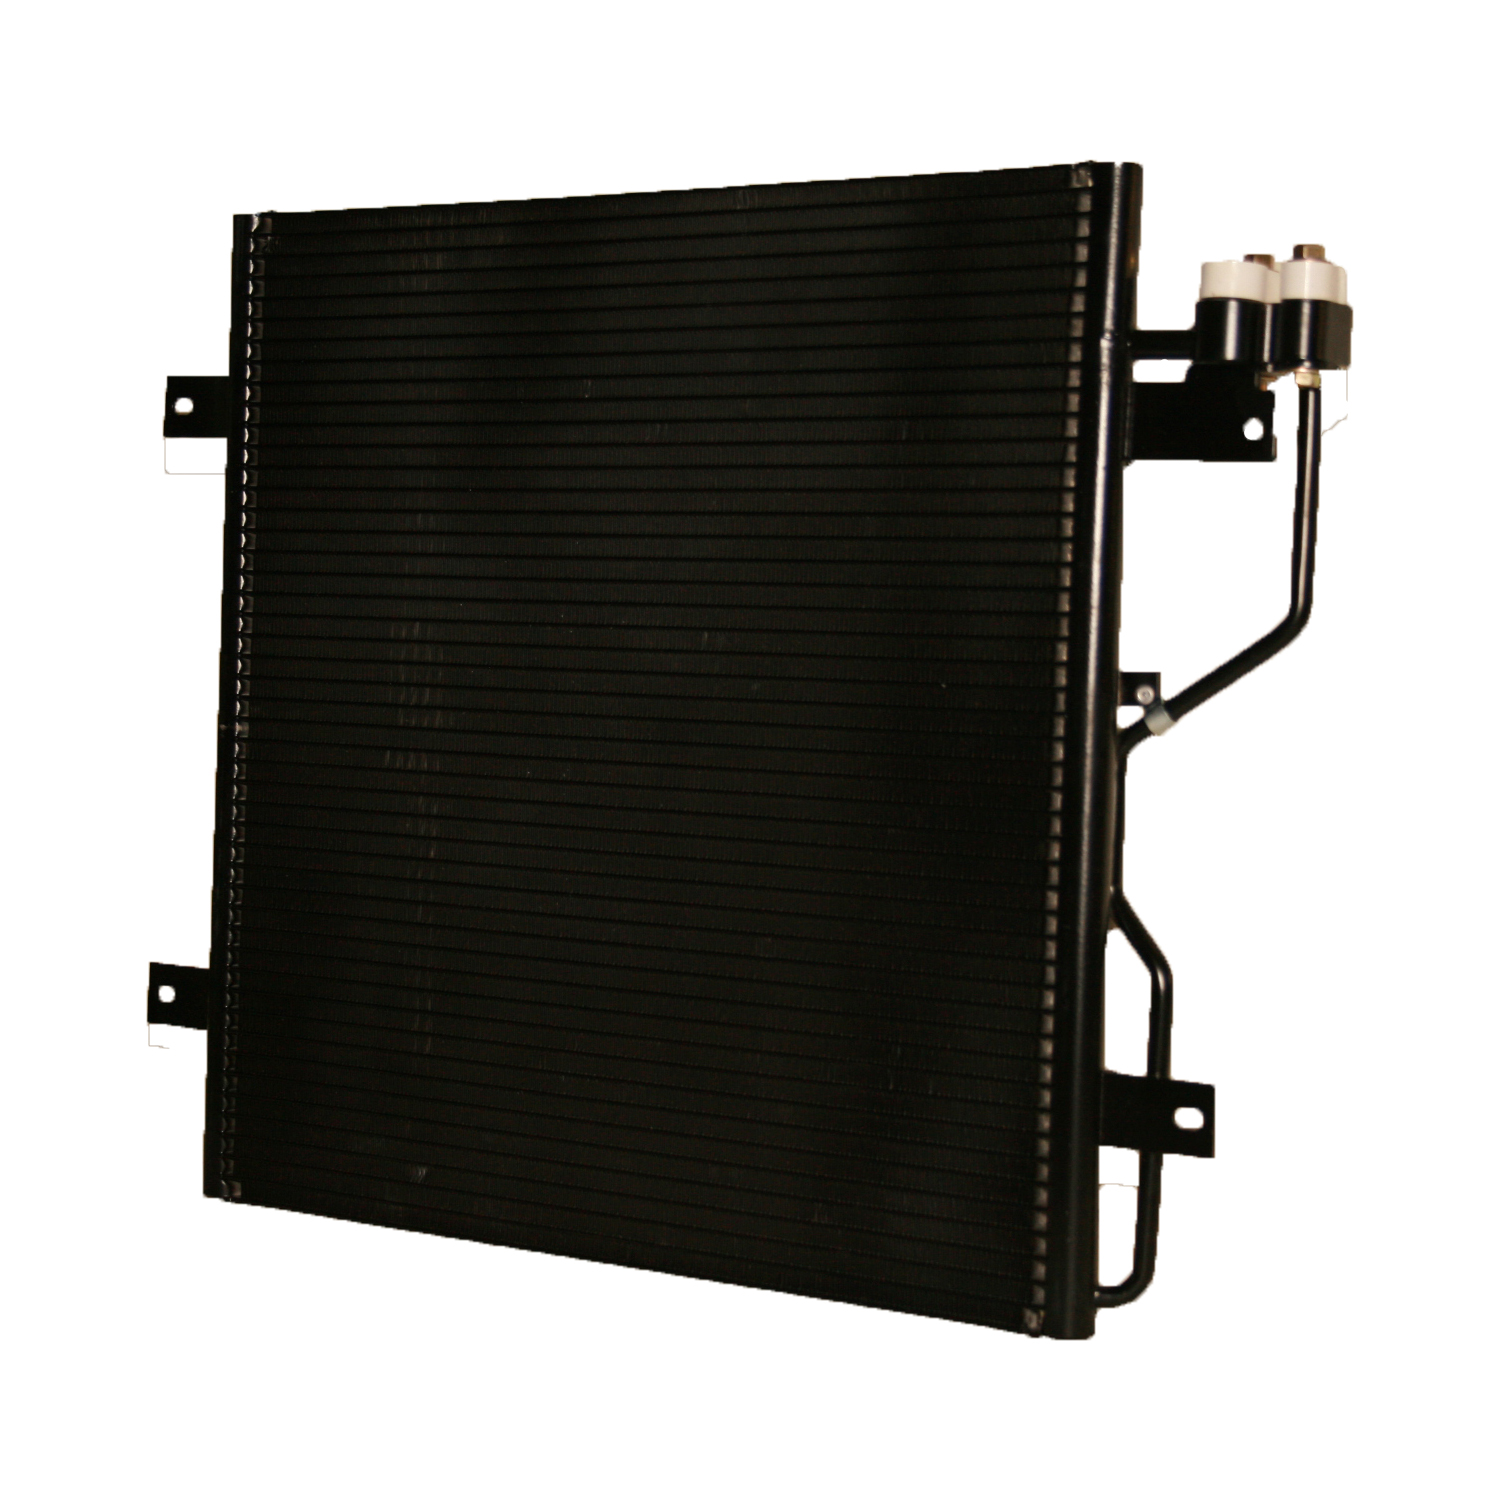 TCW Condenser 44-3596 New Product Image field_60b6a13a6e67c